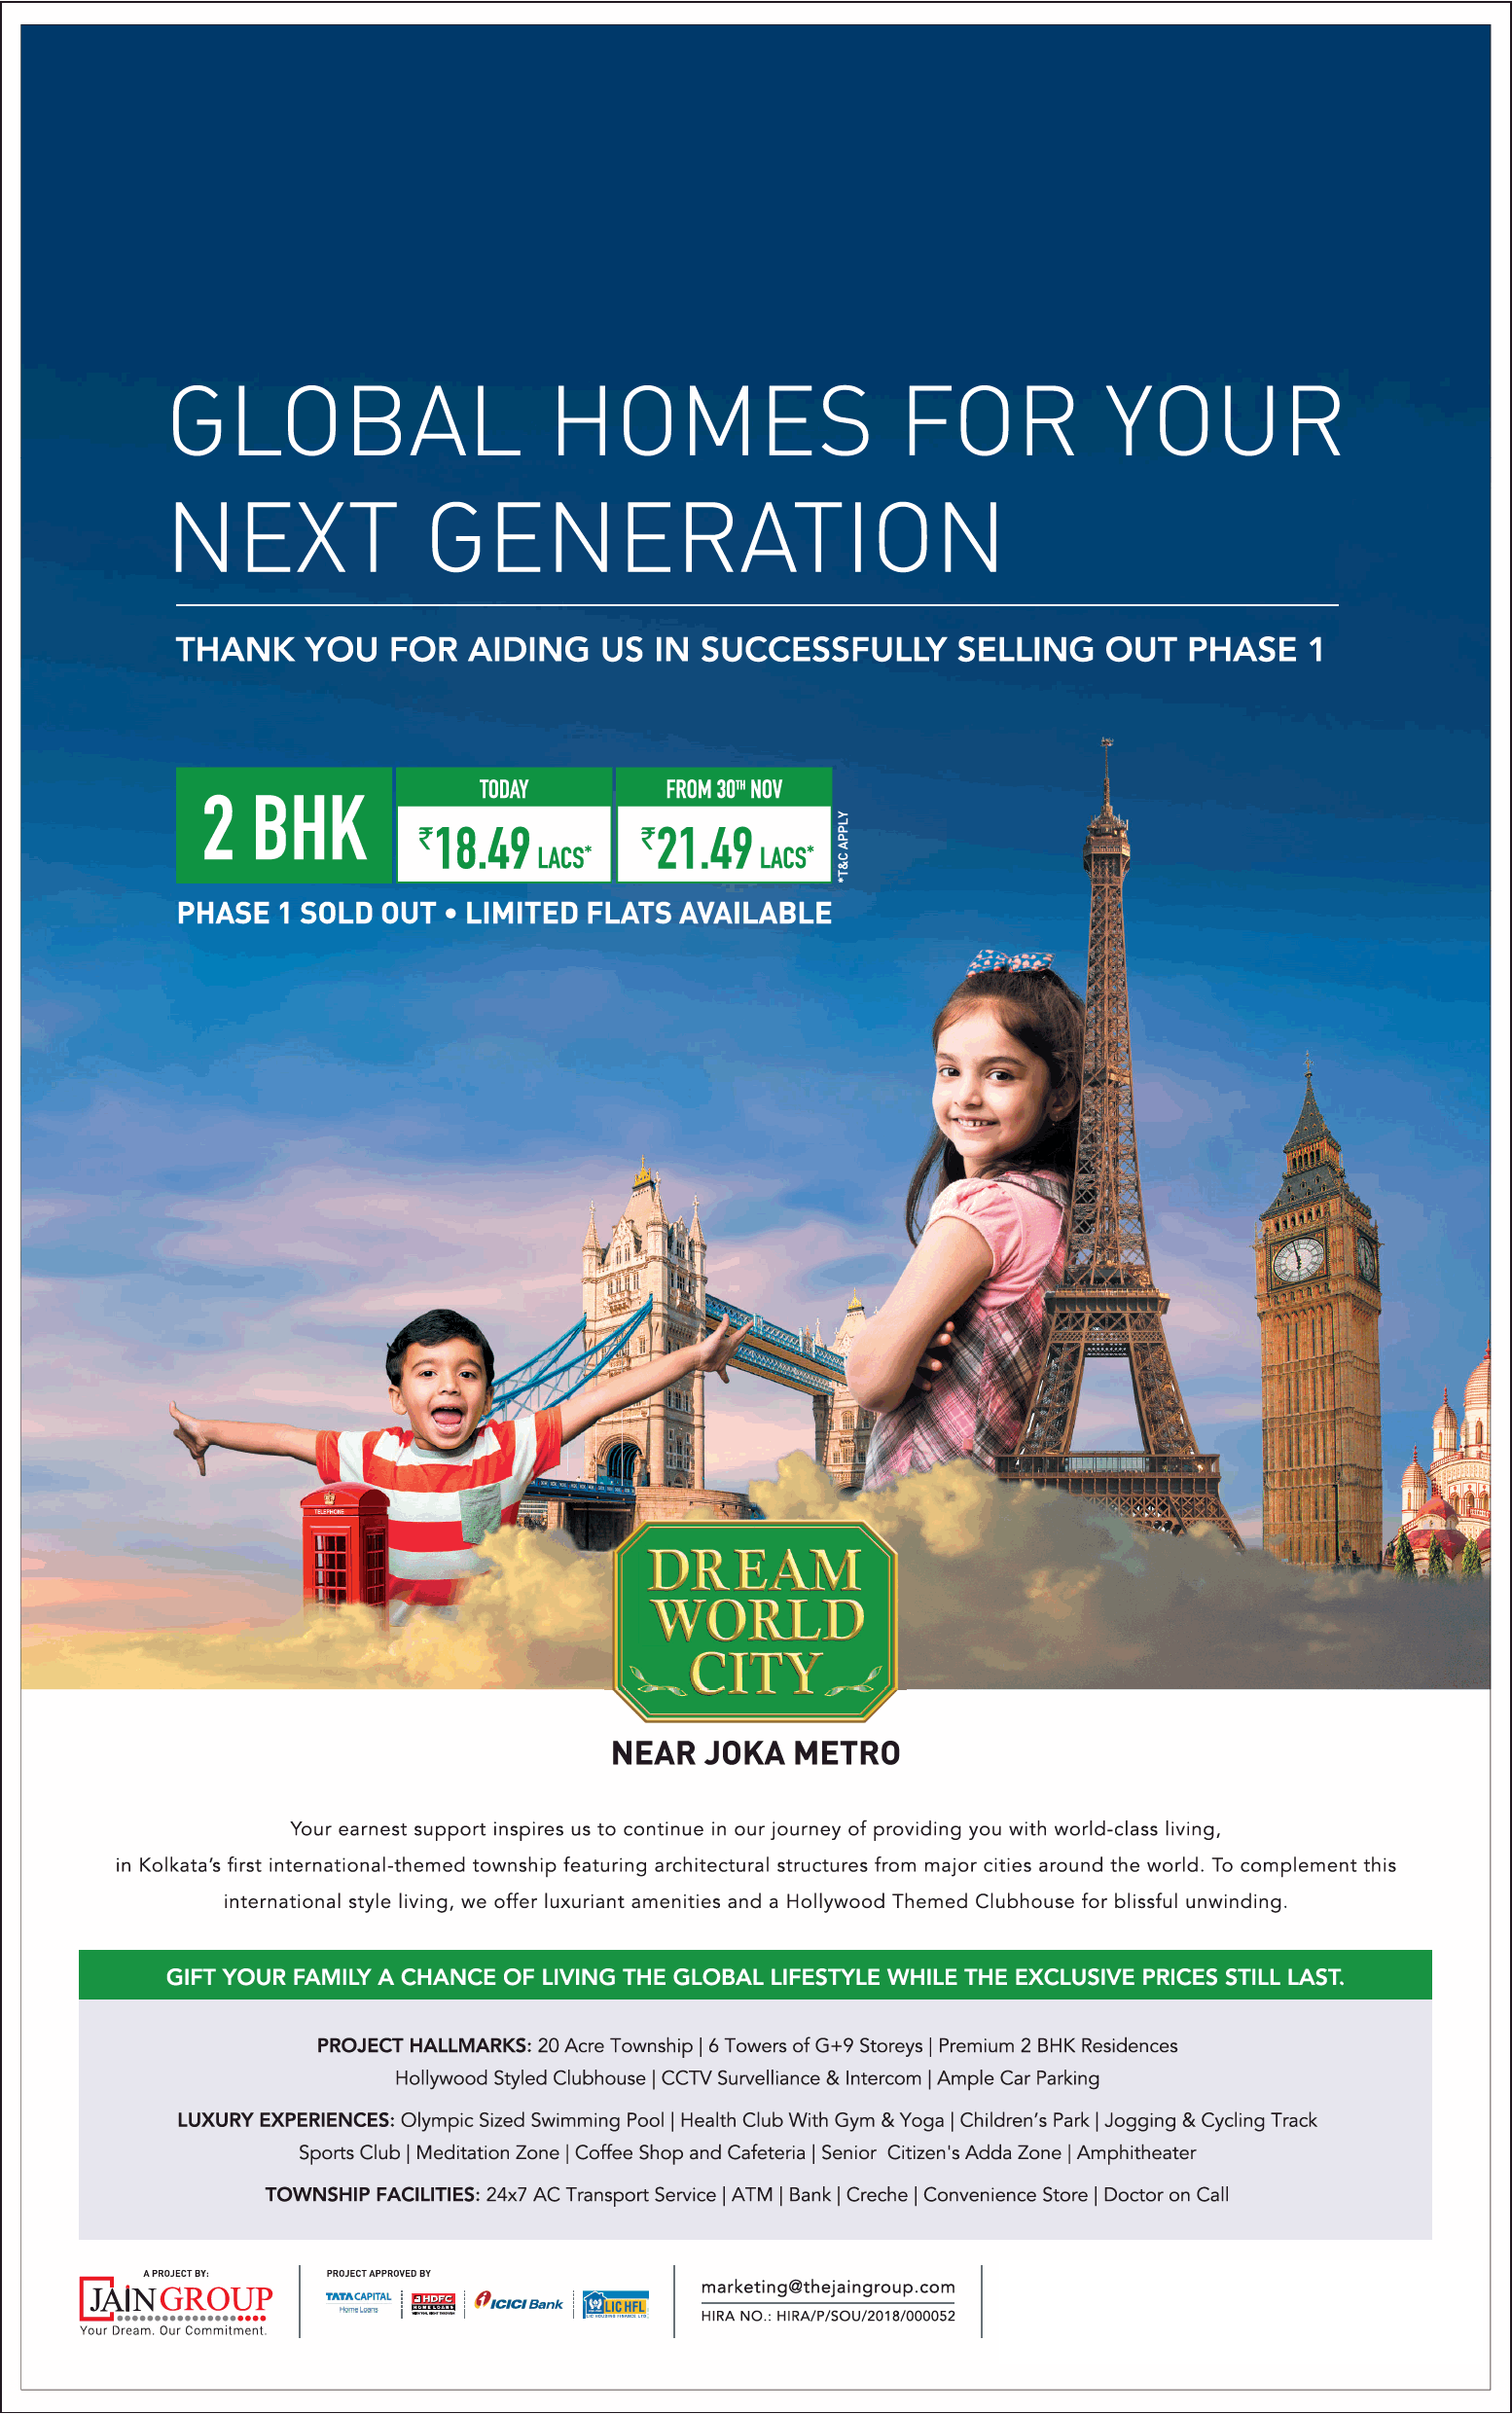 Phase 1 sold out limited flats available at Jain Dream World City in Kolkata Update